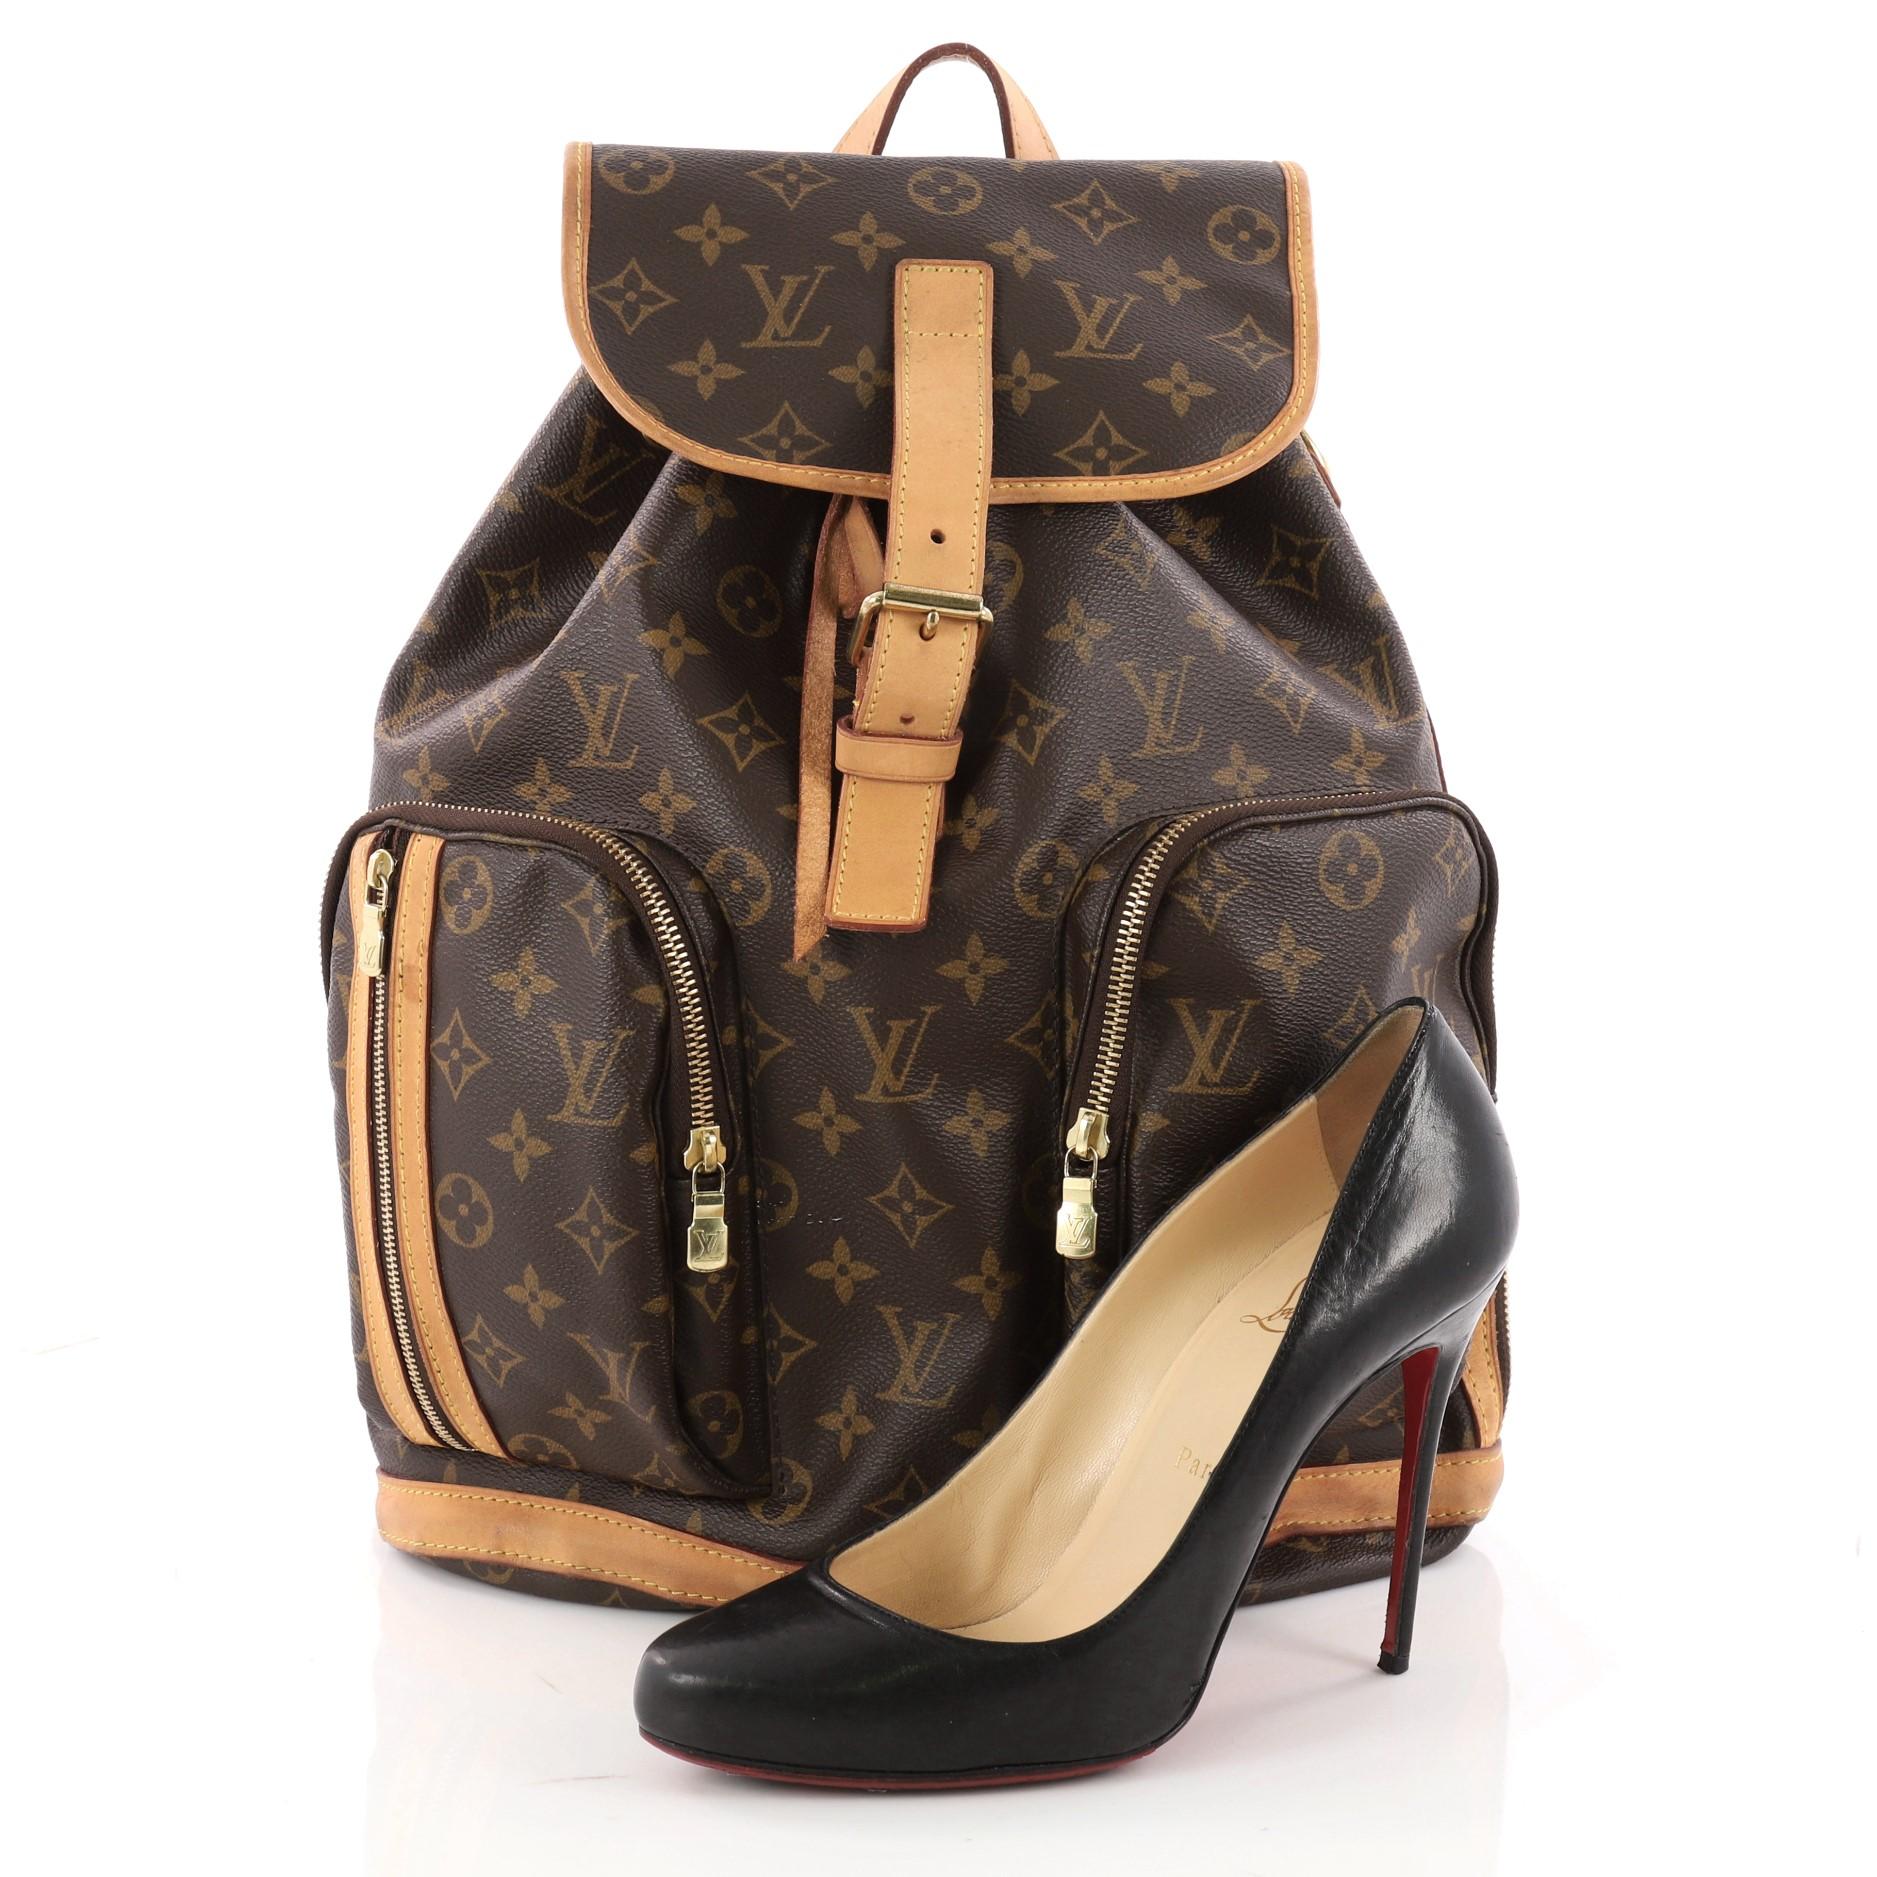 This authentic Louis Vuitton Bosphore Backpack Monogram Canvas is perfect for on-the-go fashionistas. Crafted from Louis Vuitton's brown monogram coated canvas with vachetta leather trims, this popular backpack features exterior front zip pockets,